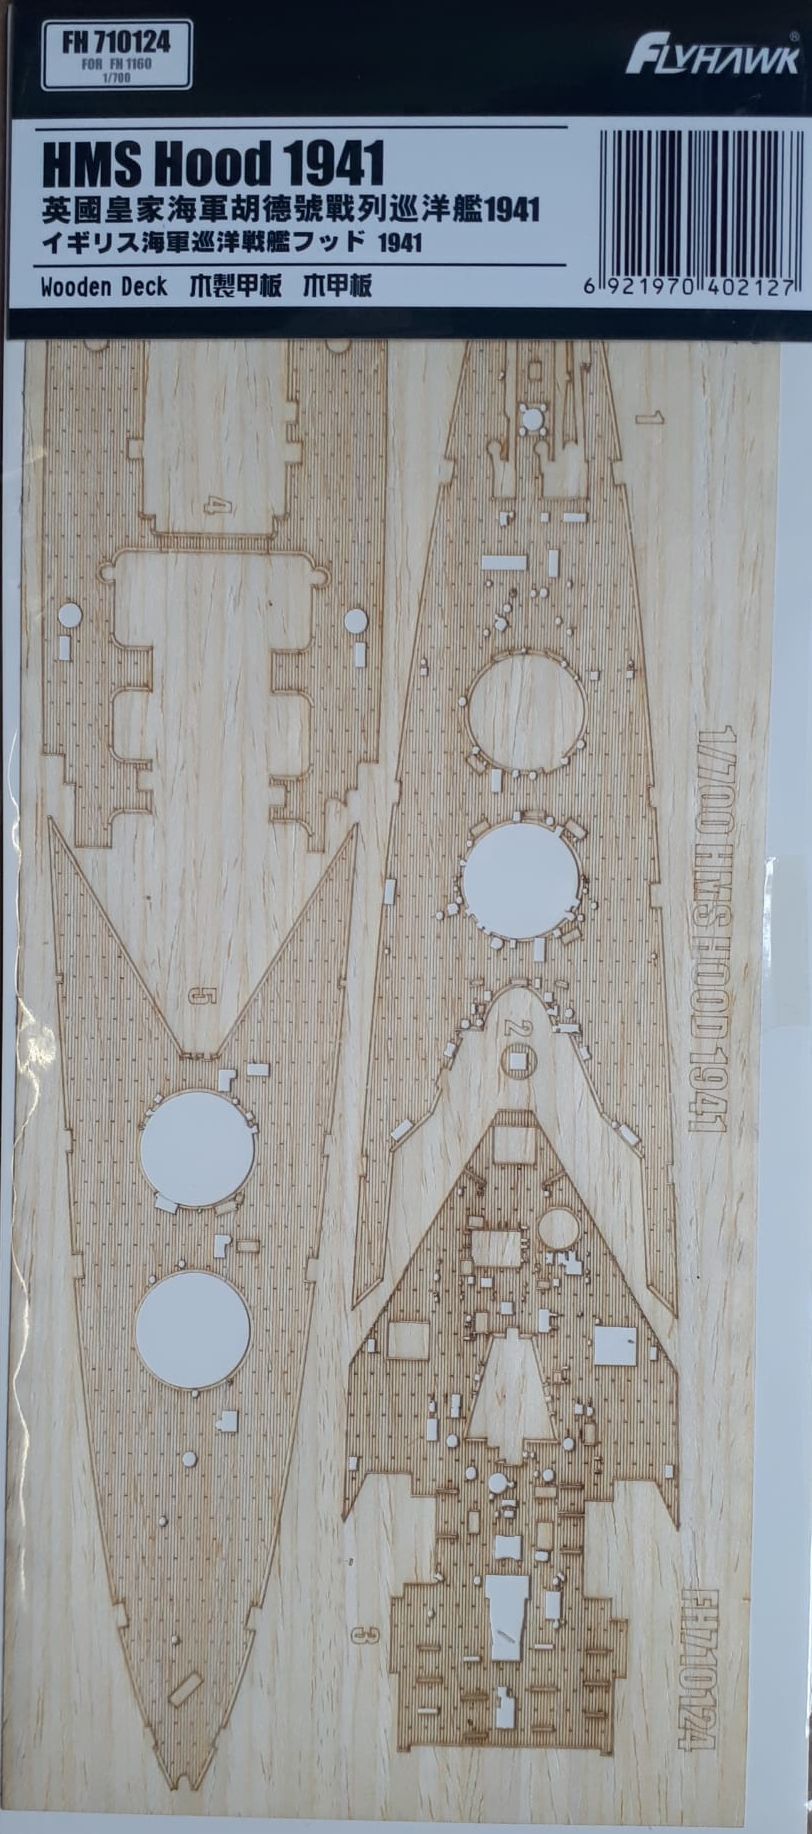 HMS Hood 1941 Wooden Deck (for FH1160)